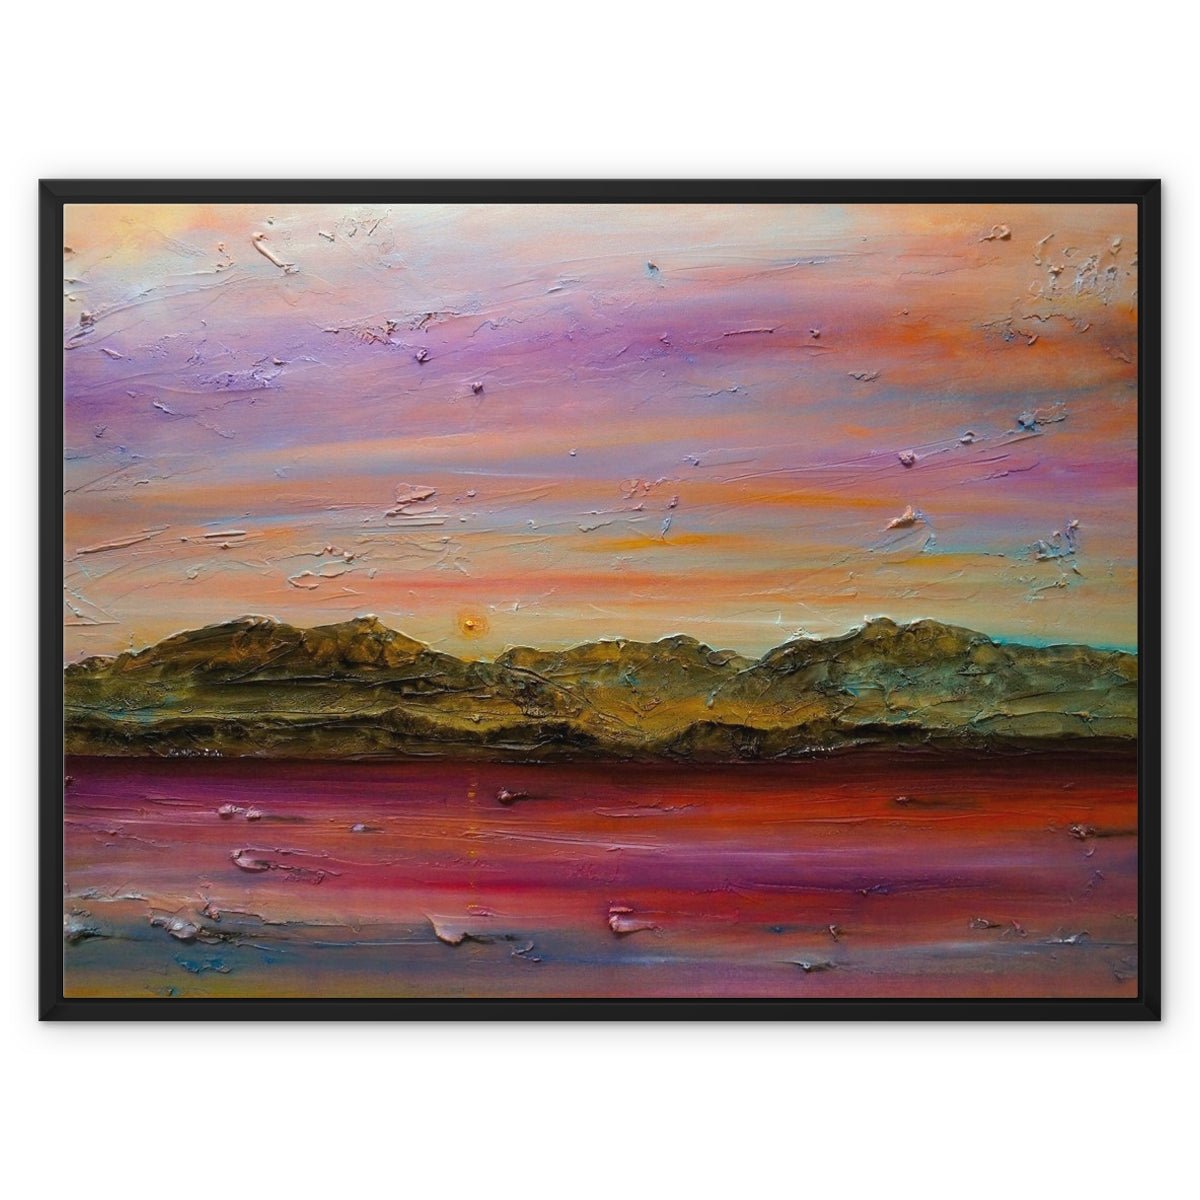 Arran Autumn Dusk Painting | Framed Canvas From Scotland-Floating Framed Canvas Prints-Arran Art Gallery-32"x24"-Black Frame-Paintings, Prints, Homeware, Art Gifts From Scotland By Scottish Artist Kevin Hunter